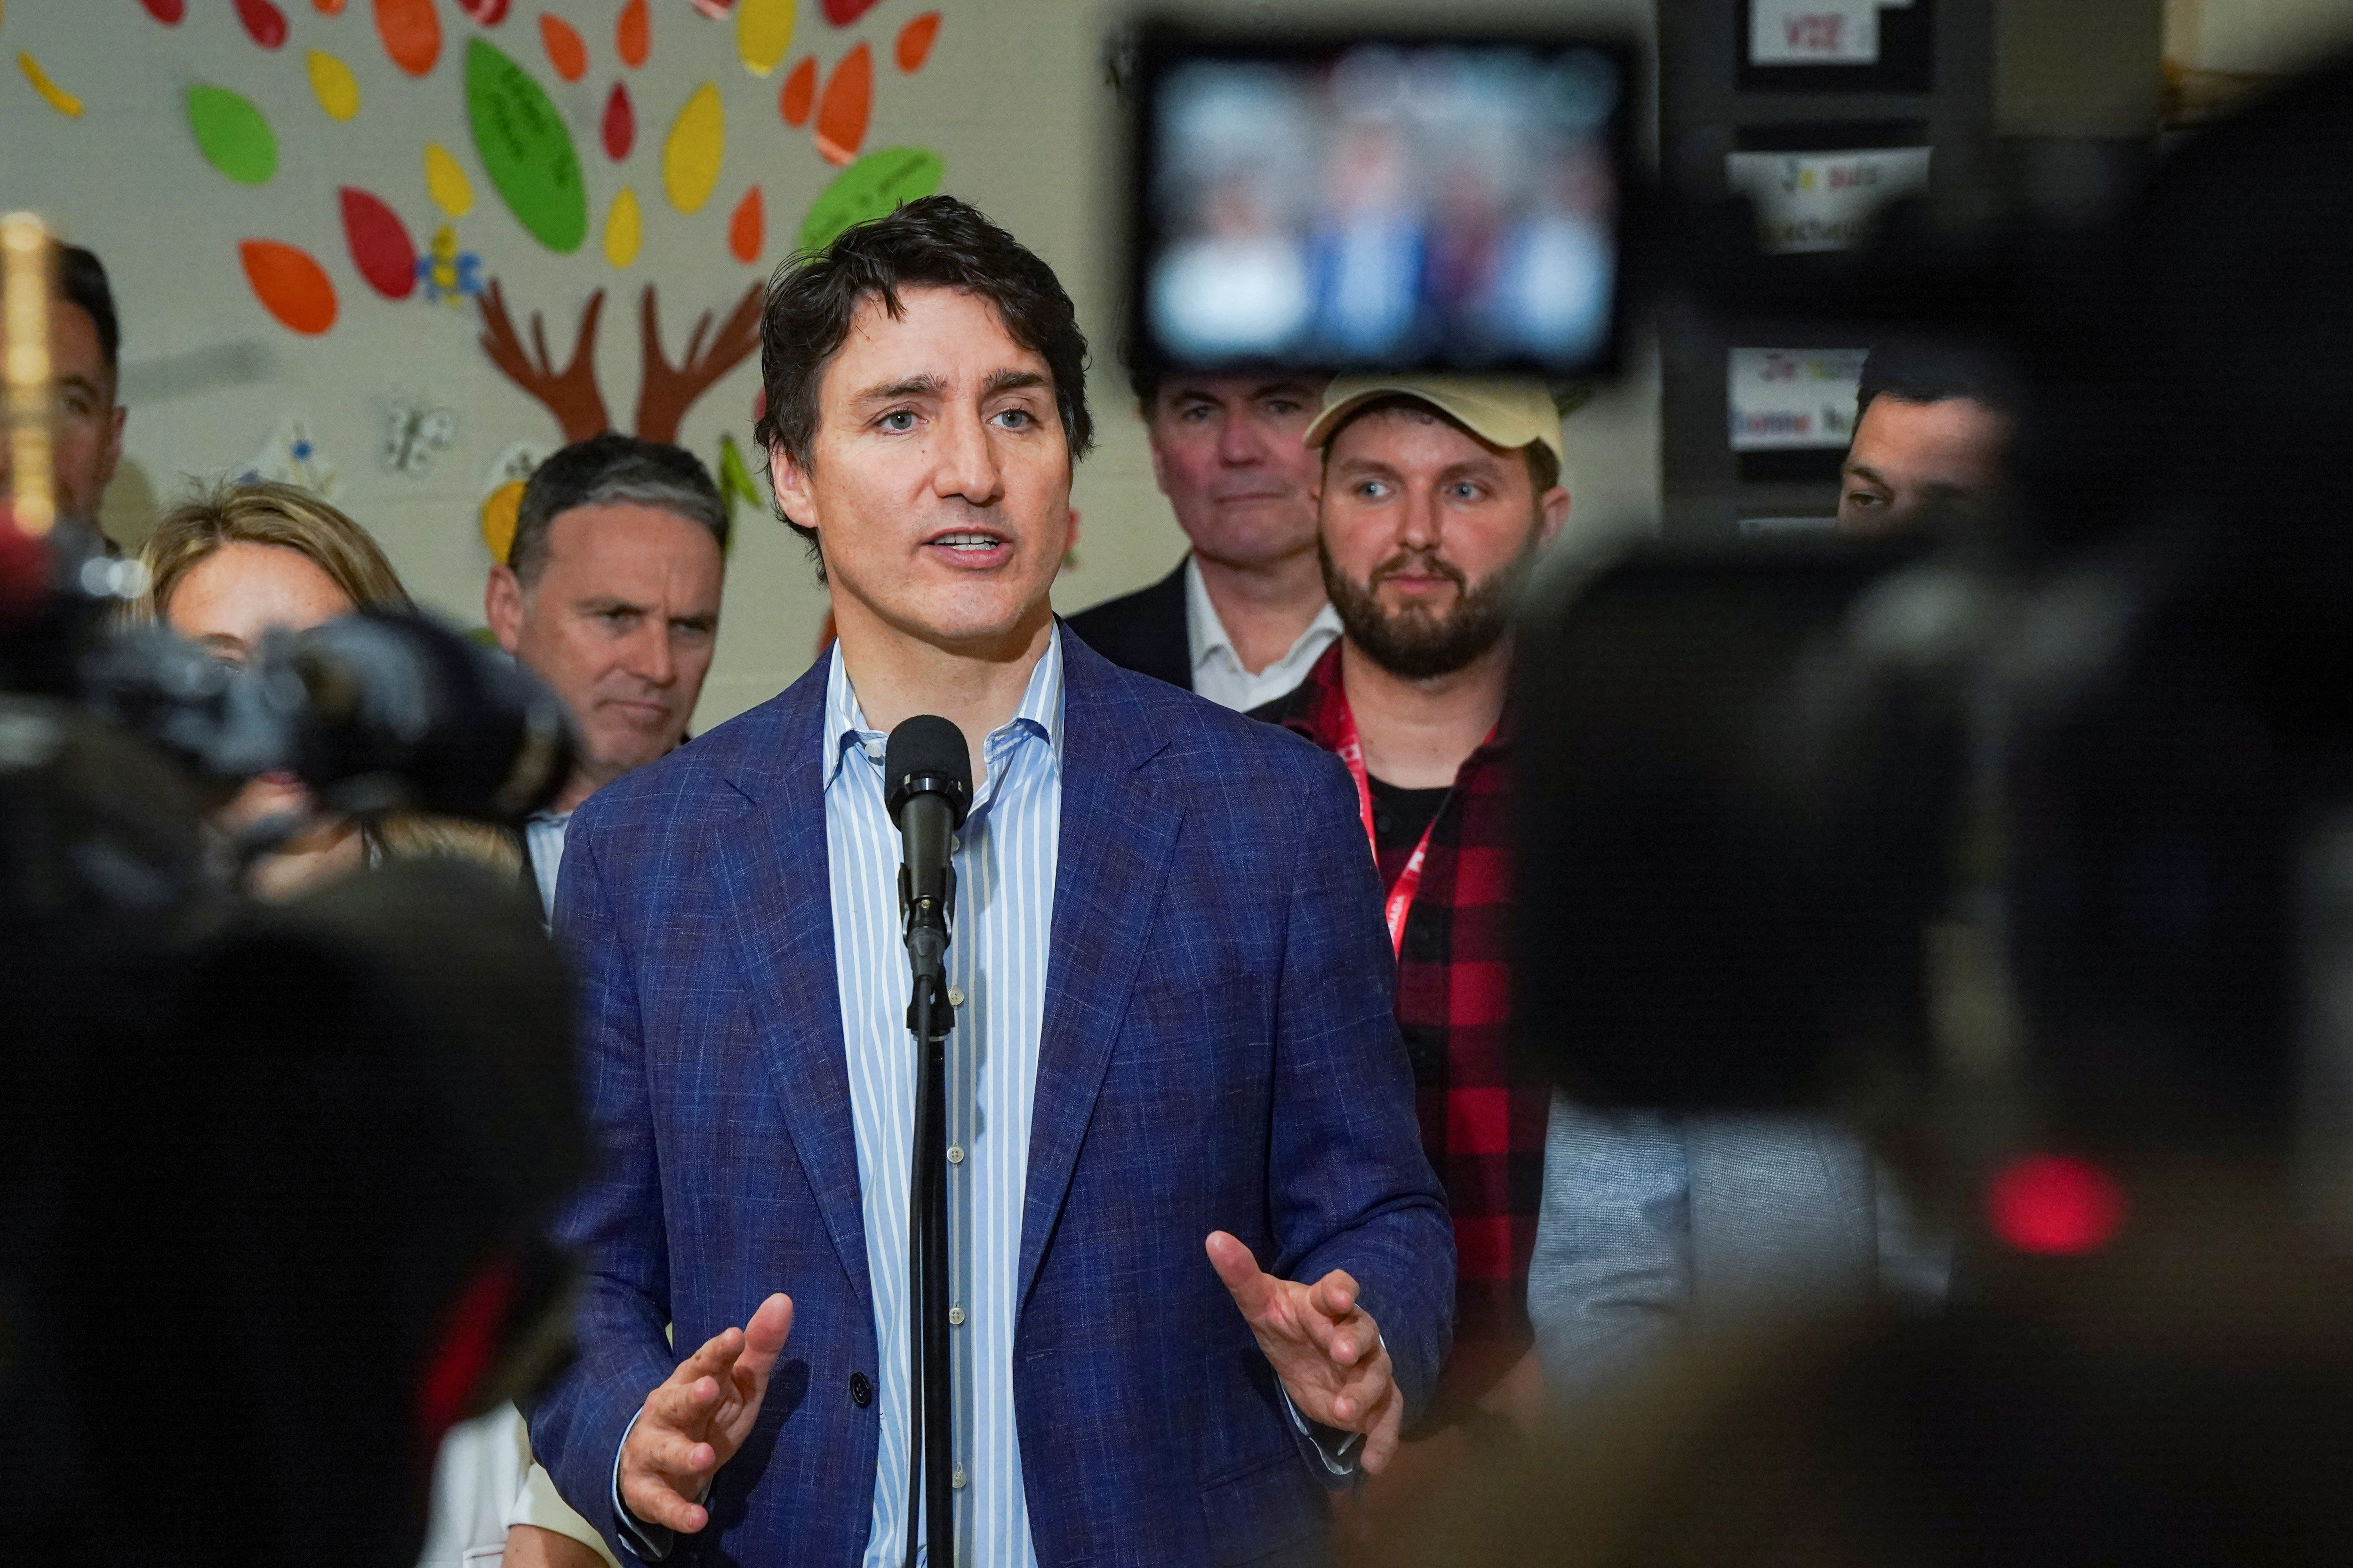 Canada's PM Trudeau speaks at an event in Caraquet, northern New Brunswick